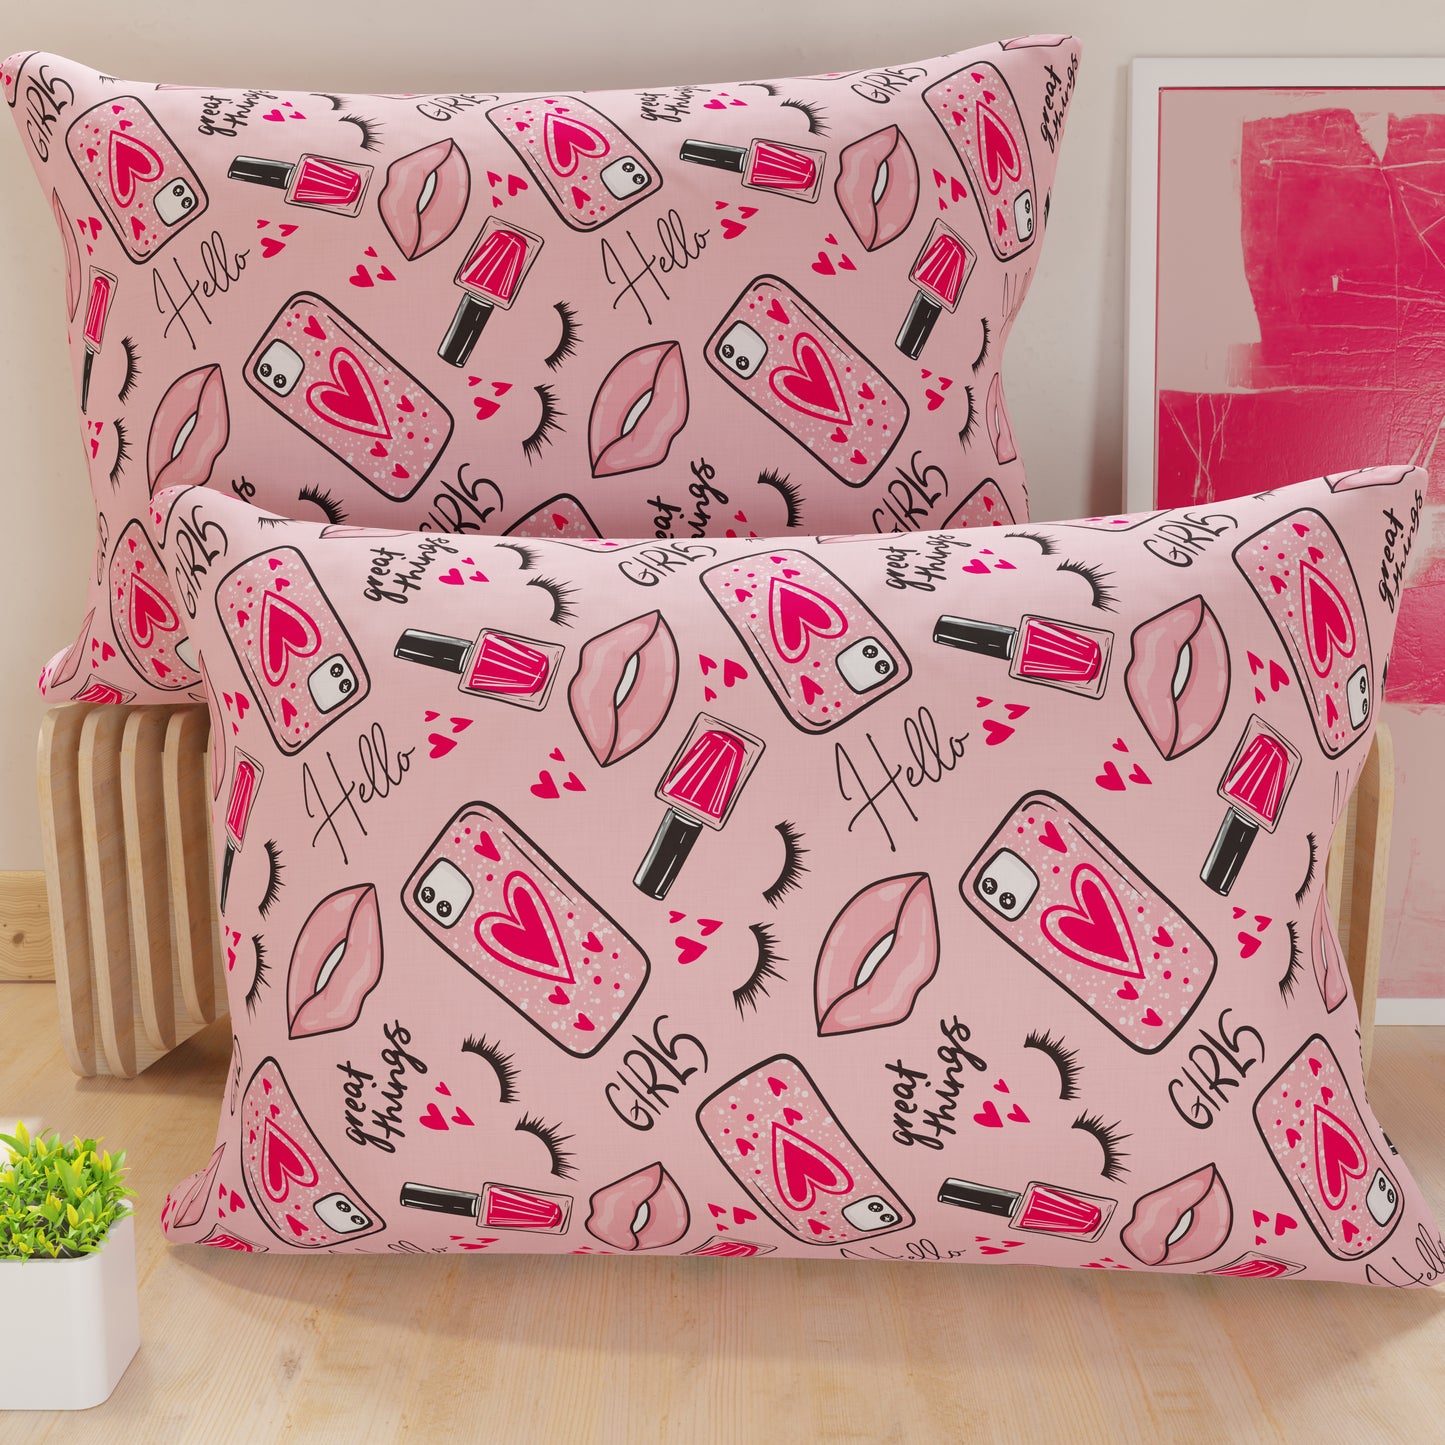 Digitally Printed Cushion Covers, Pink Lipstick